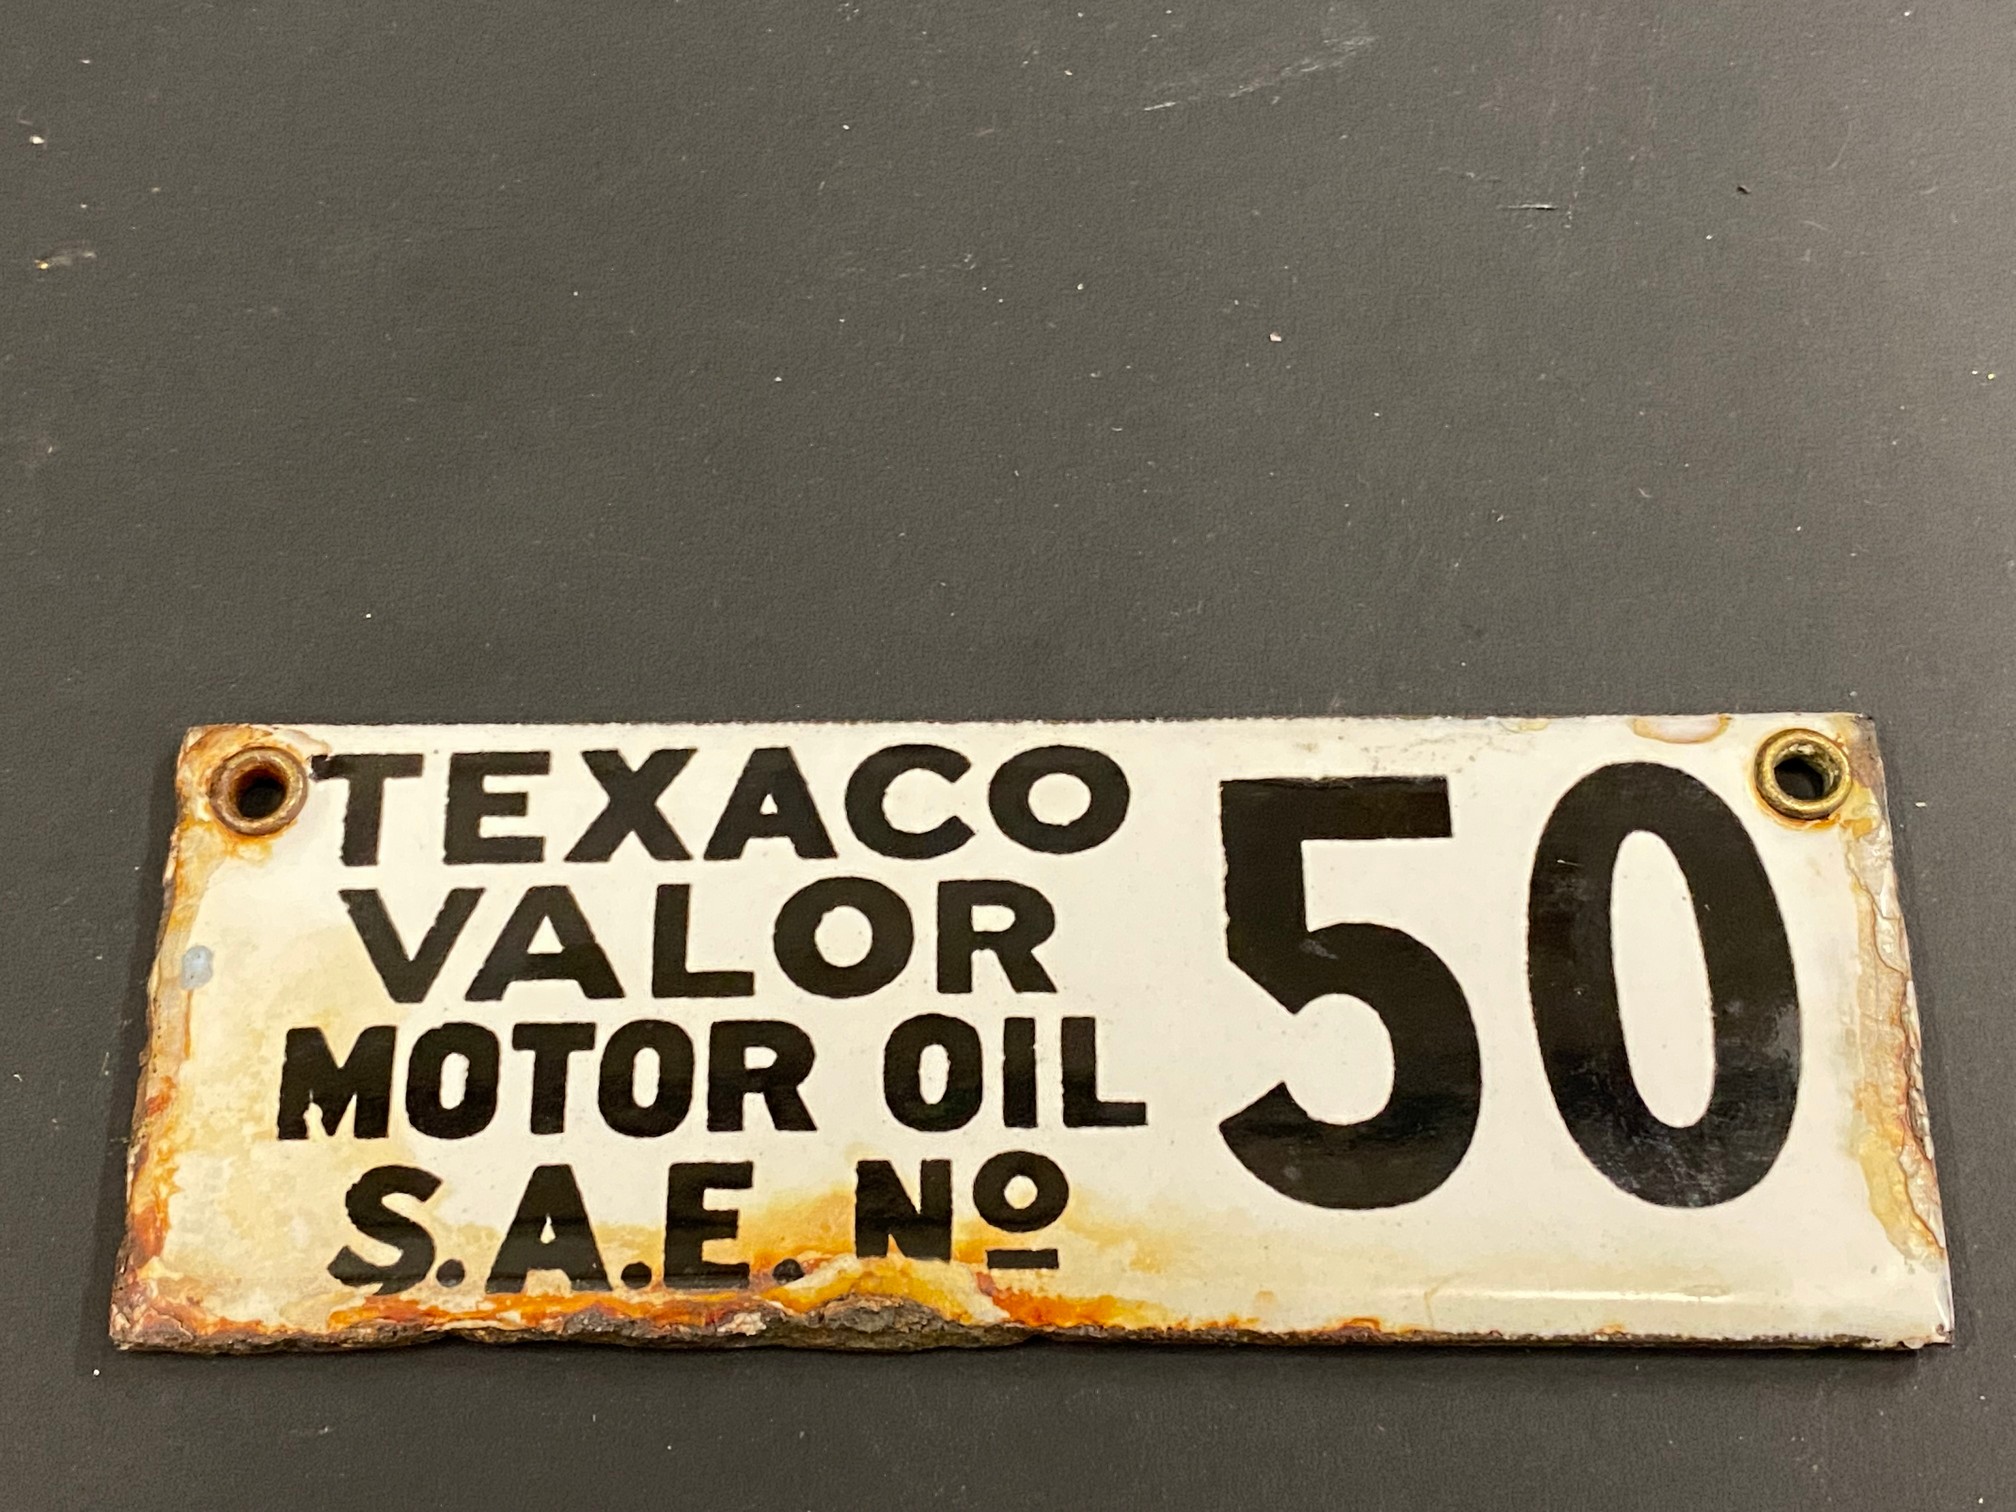 A small double sided enamel brand plaque for Texaco Valor Motor Oil, 4 x 1 1/2". - Image 2 of 2